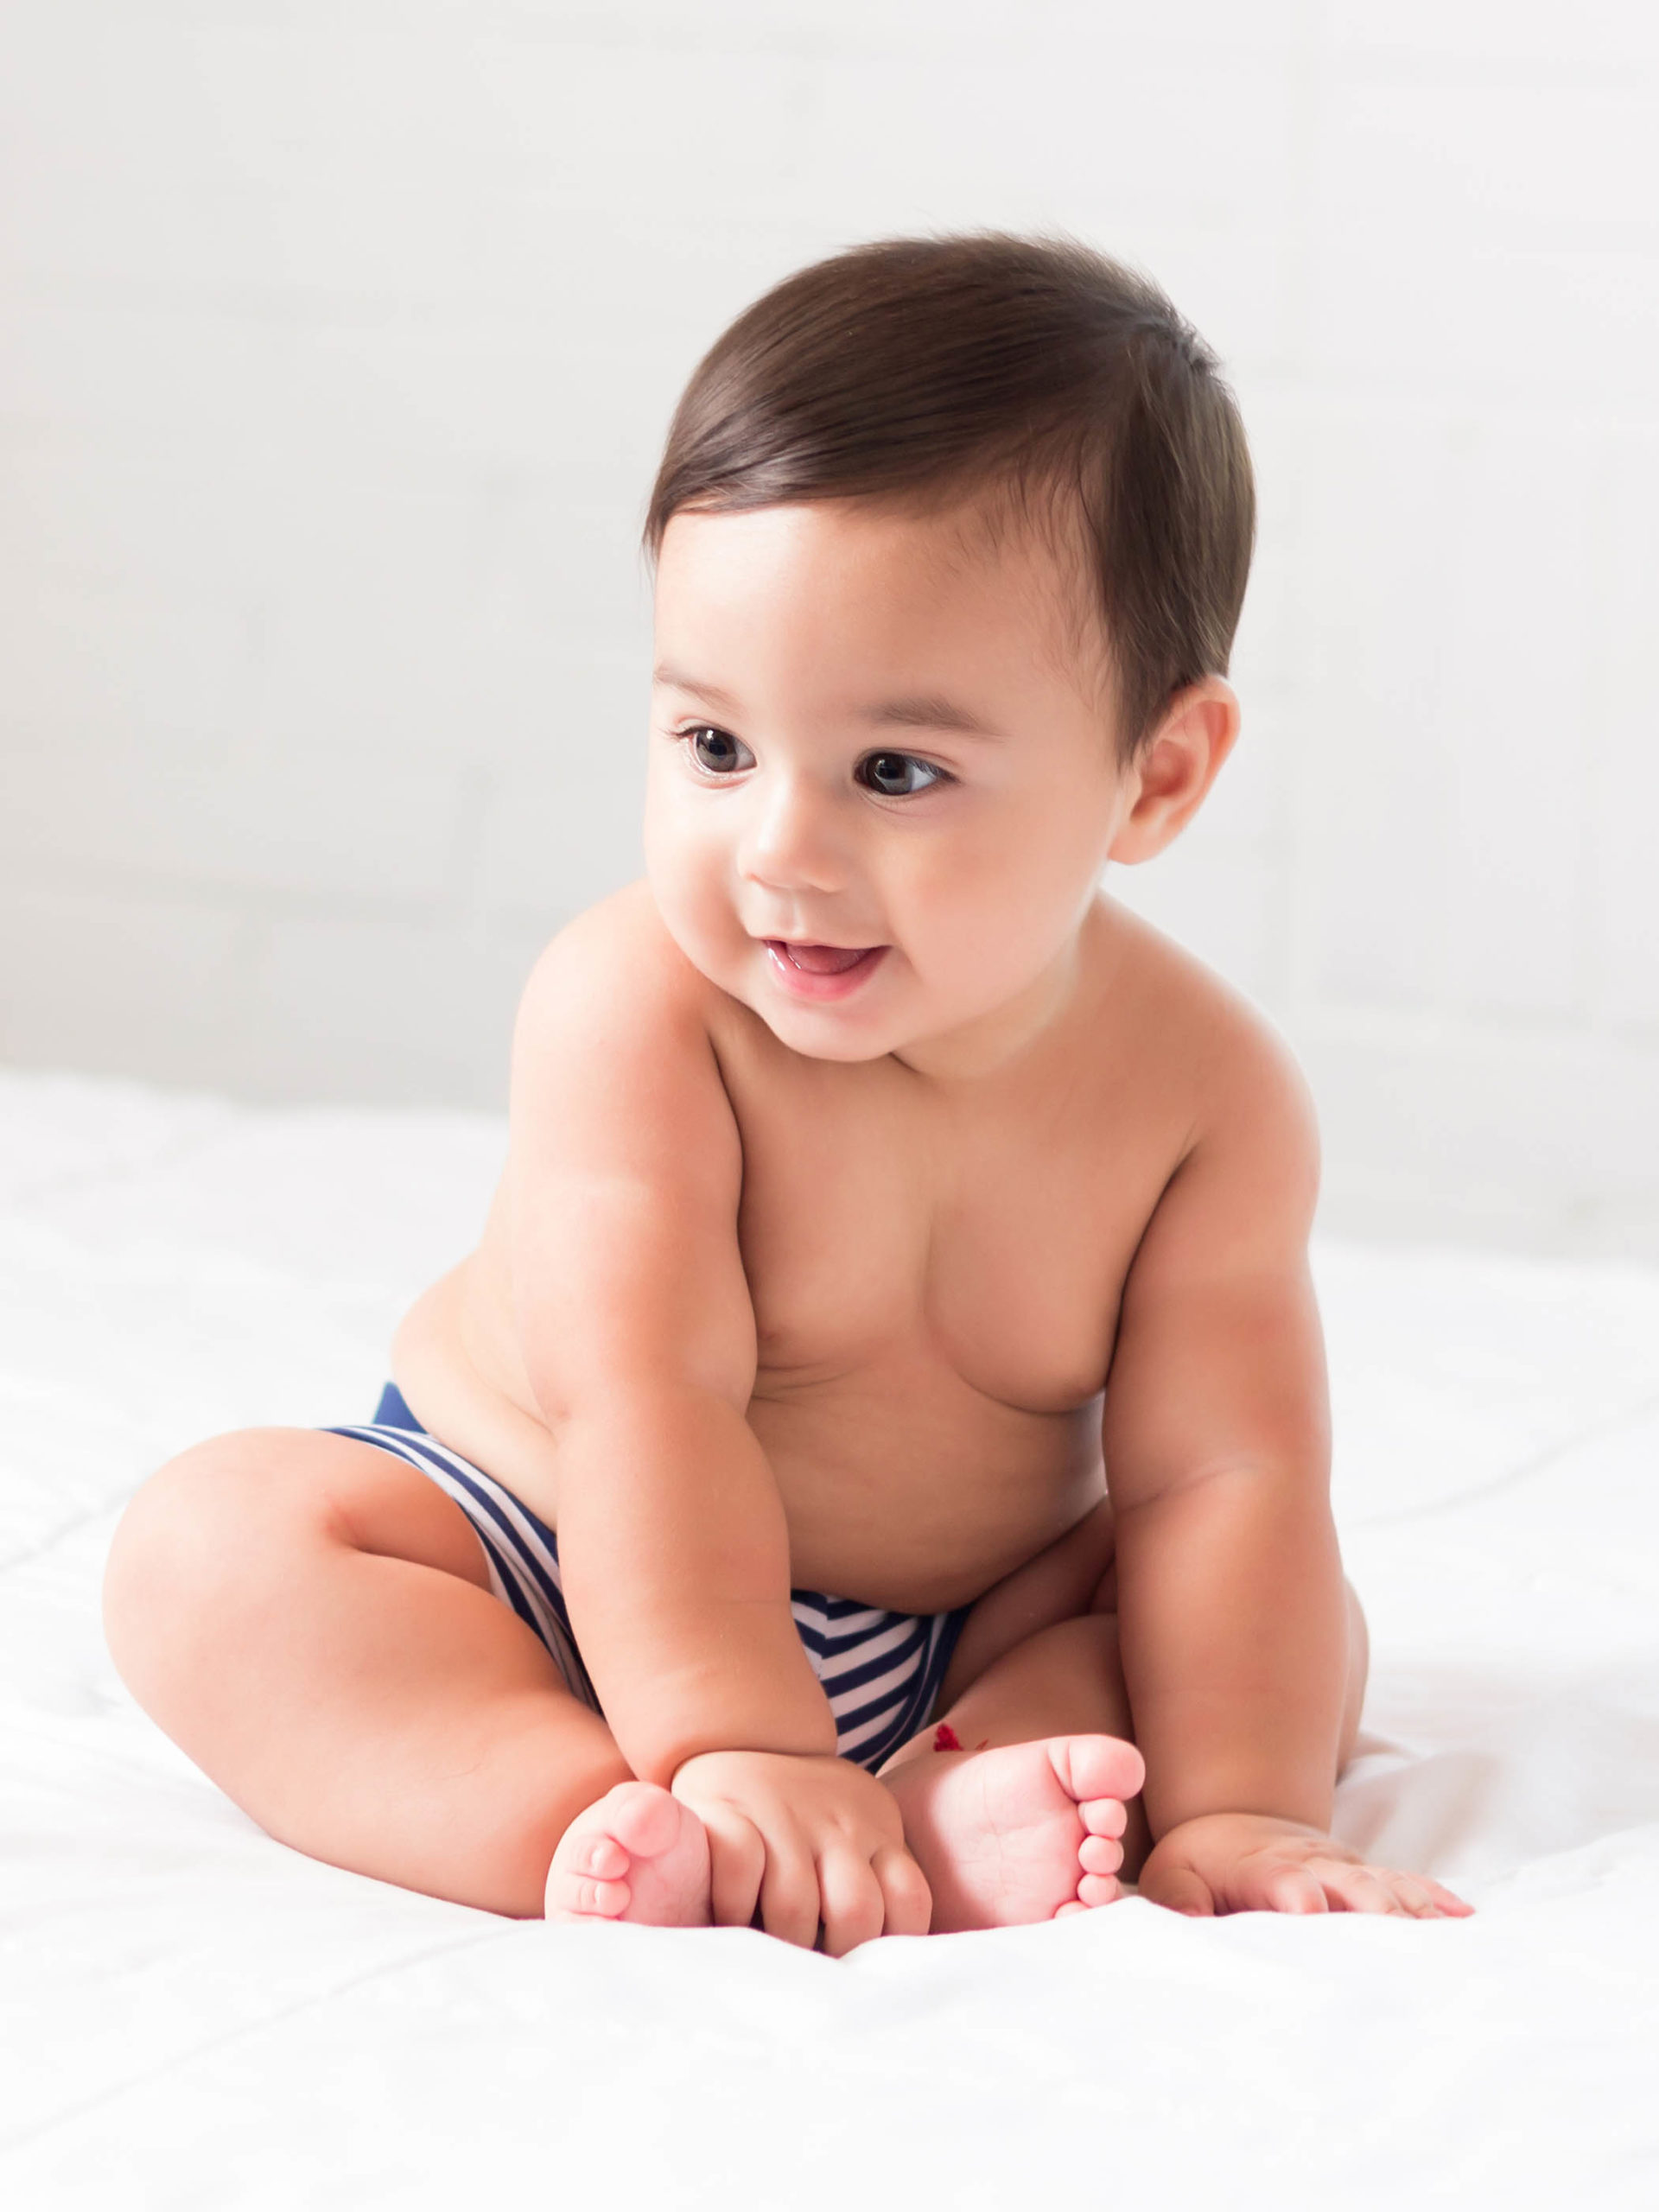 chubby happy baby sitting on bed without a shirt